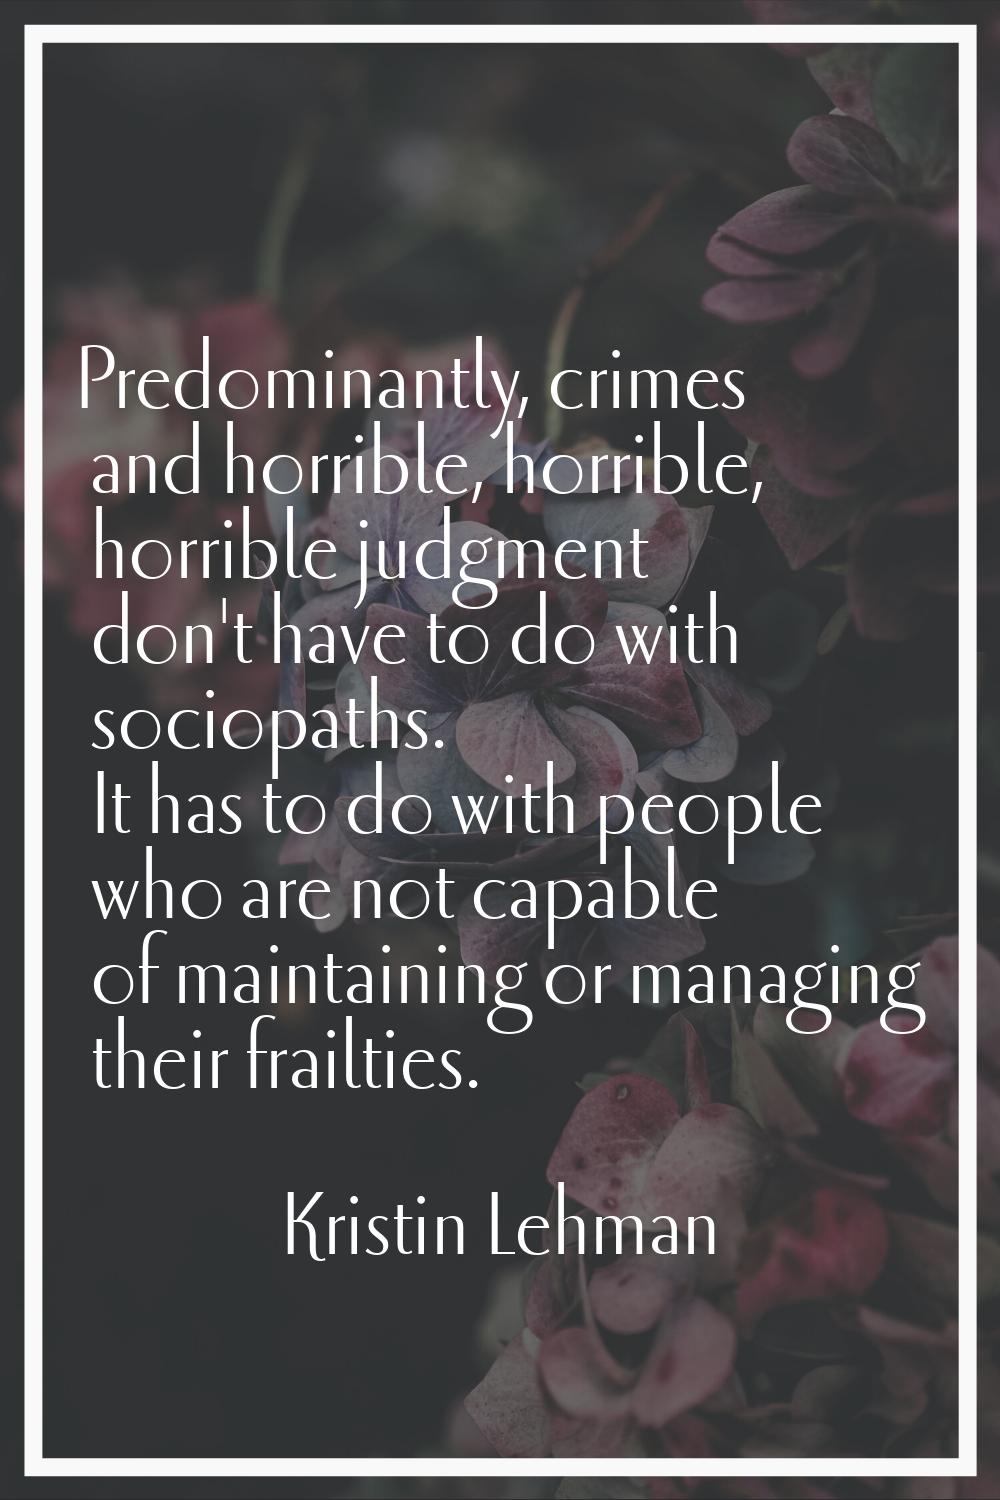 Predominantly, crimes and horrible, horrible, horrible judgment don't have to do with sociopaths. I